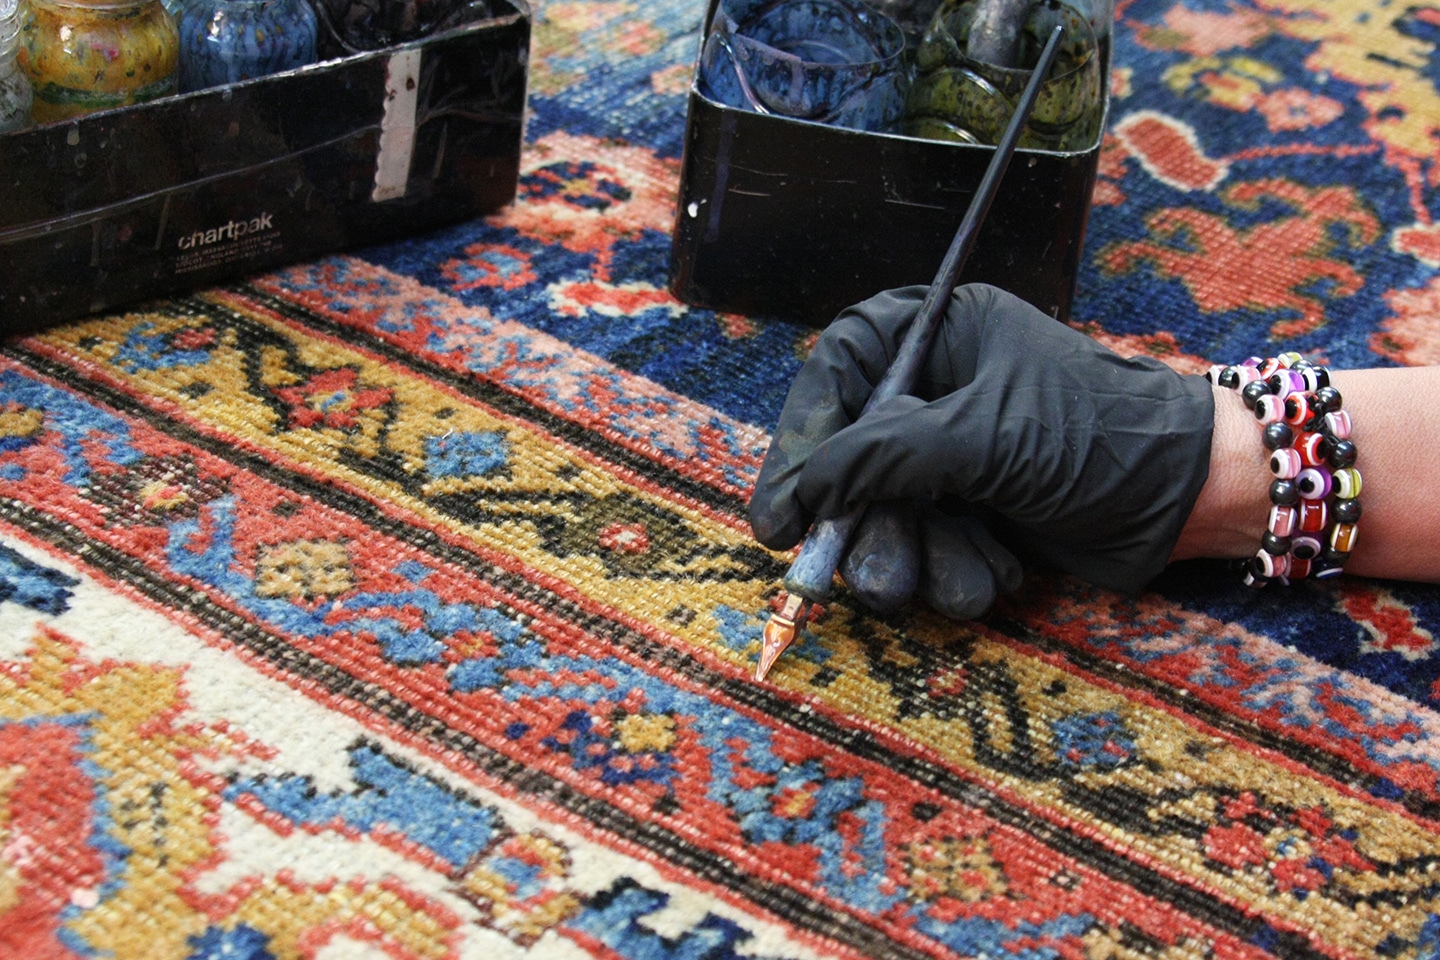 Rug Restoration and Mending Services in NYC